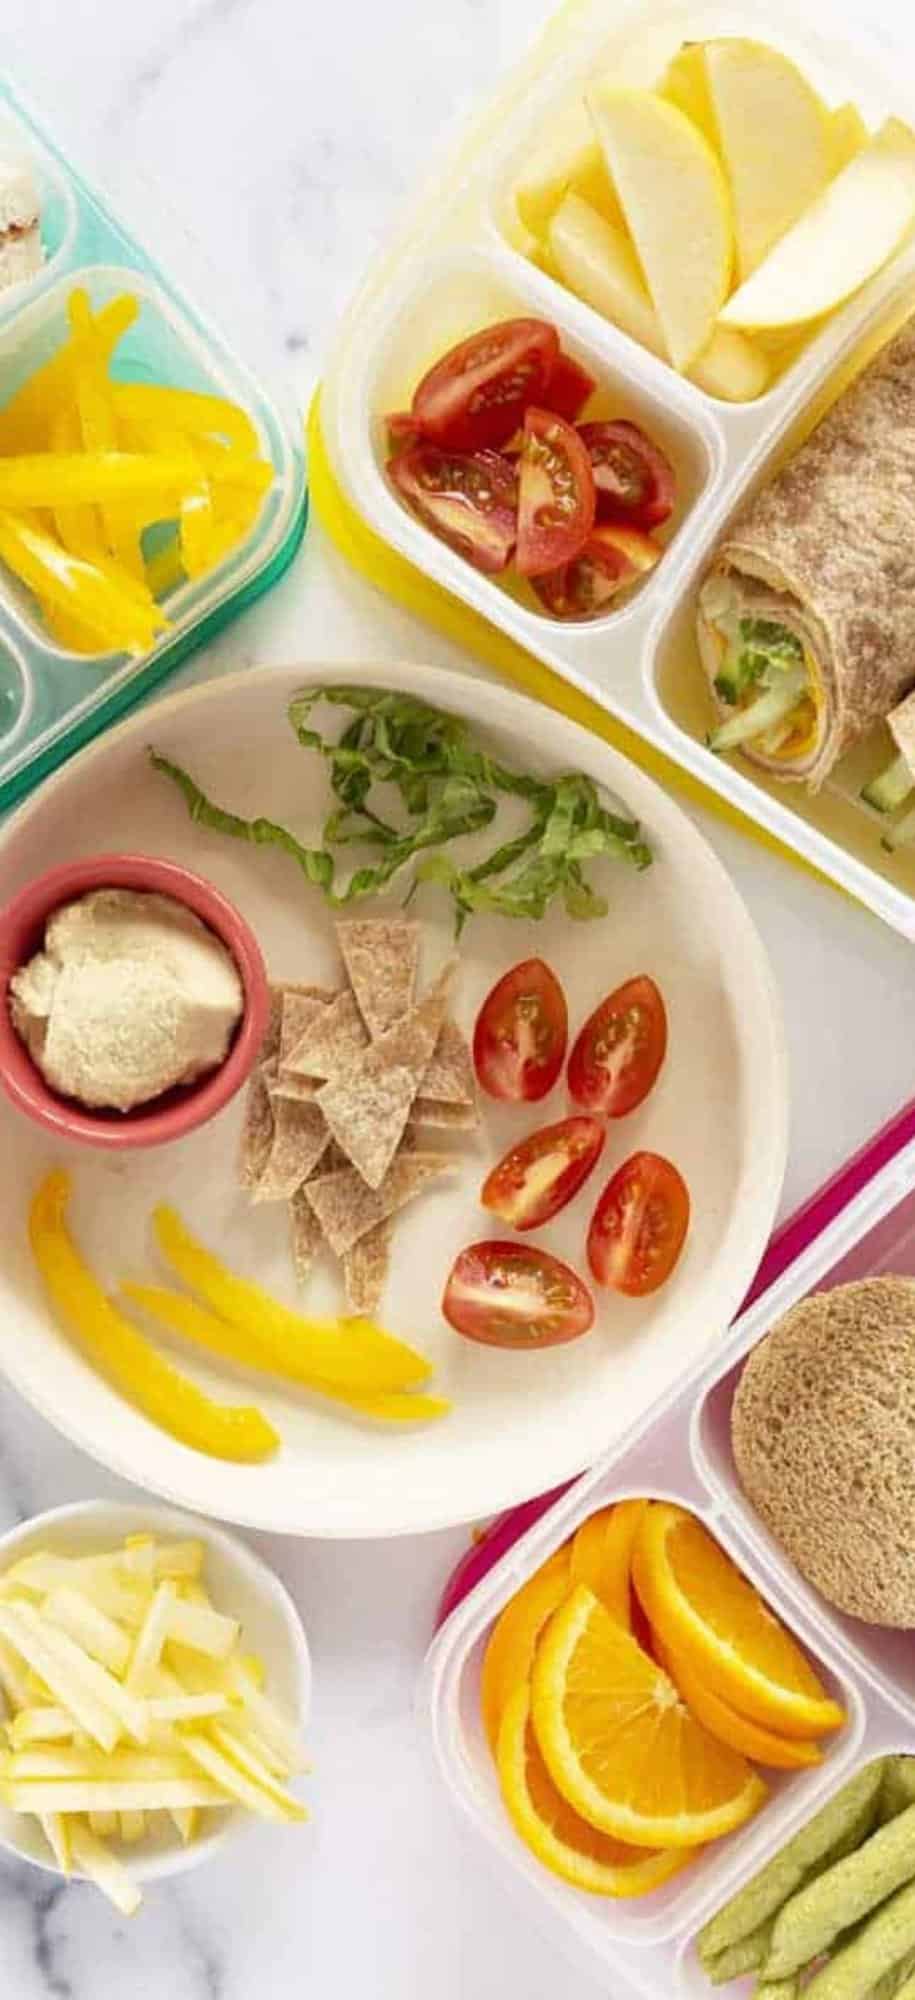 10 Budget Packed Lunch Ideas for Kids